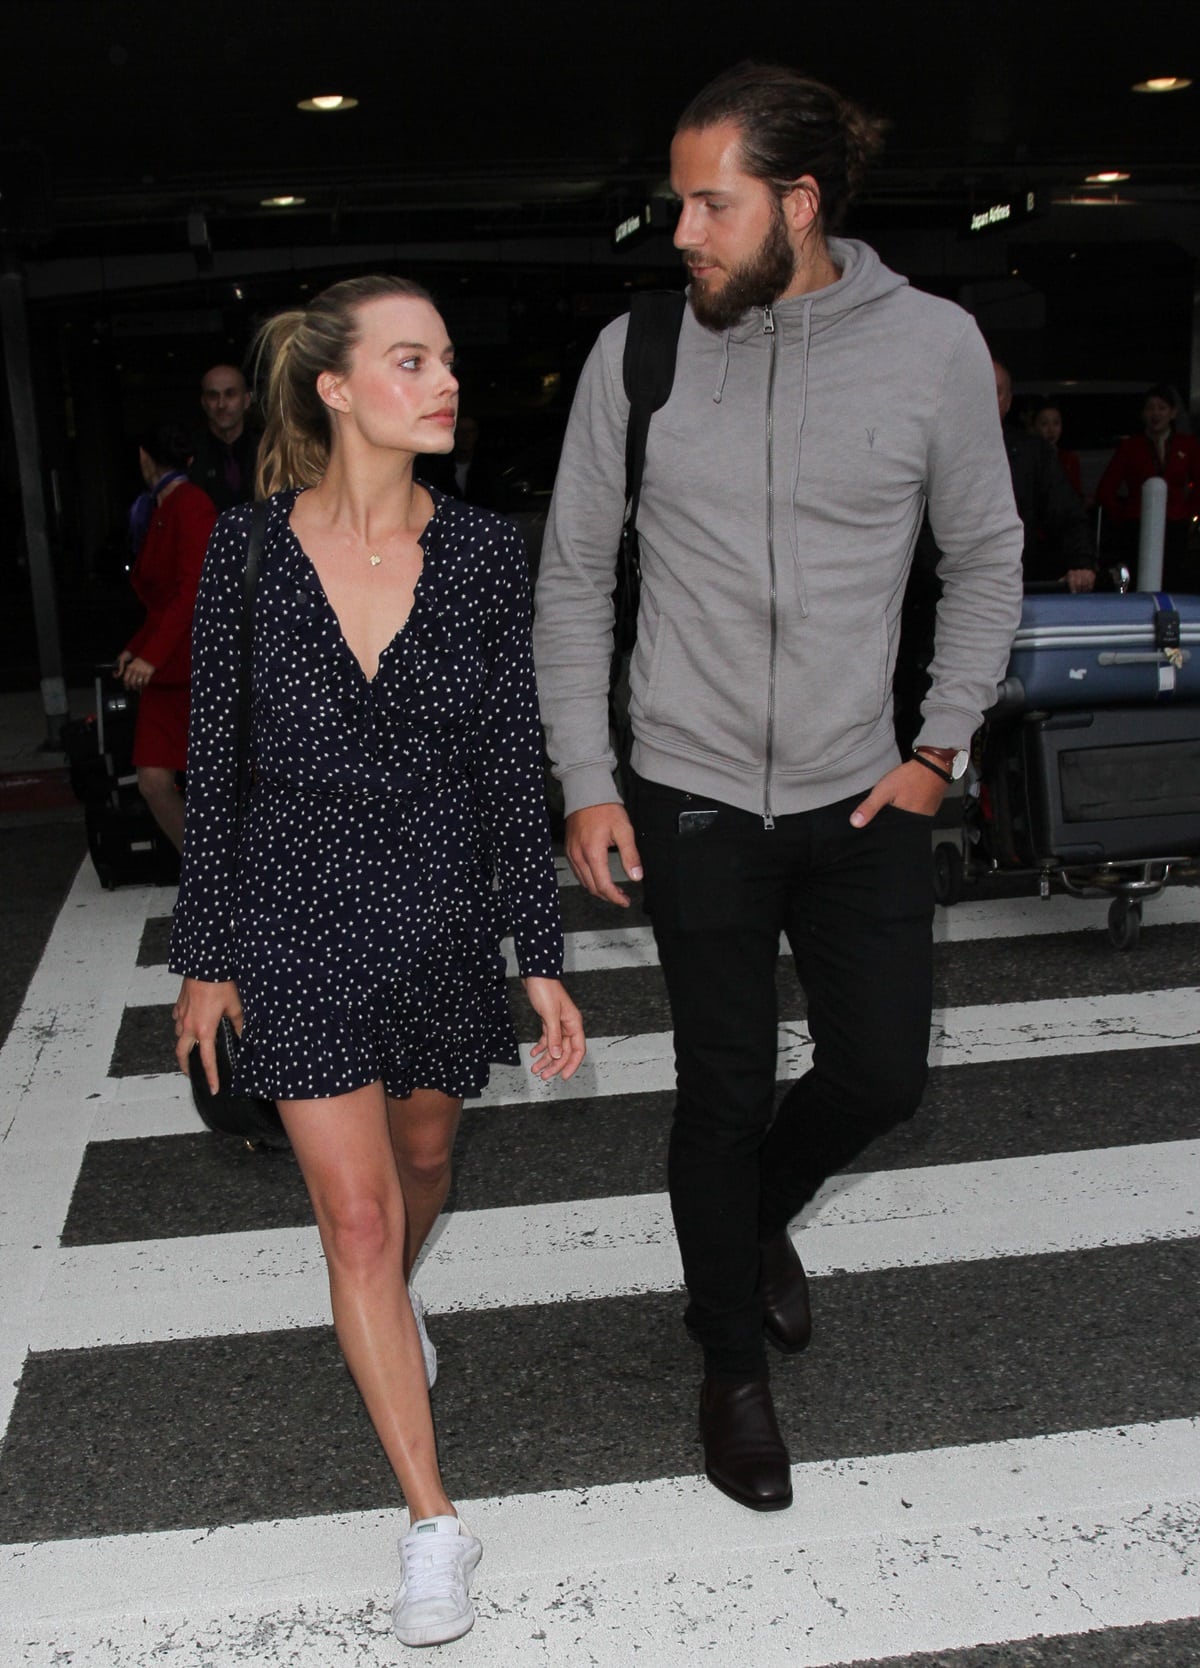 Tom Ackerley's height of 6 feet 3 inches (approximately 1.91 meters) makes him significantly taller than Margot Robbie, who stands at 5 feet 5 ½ inches (166.4 cm)